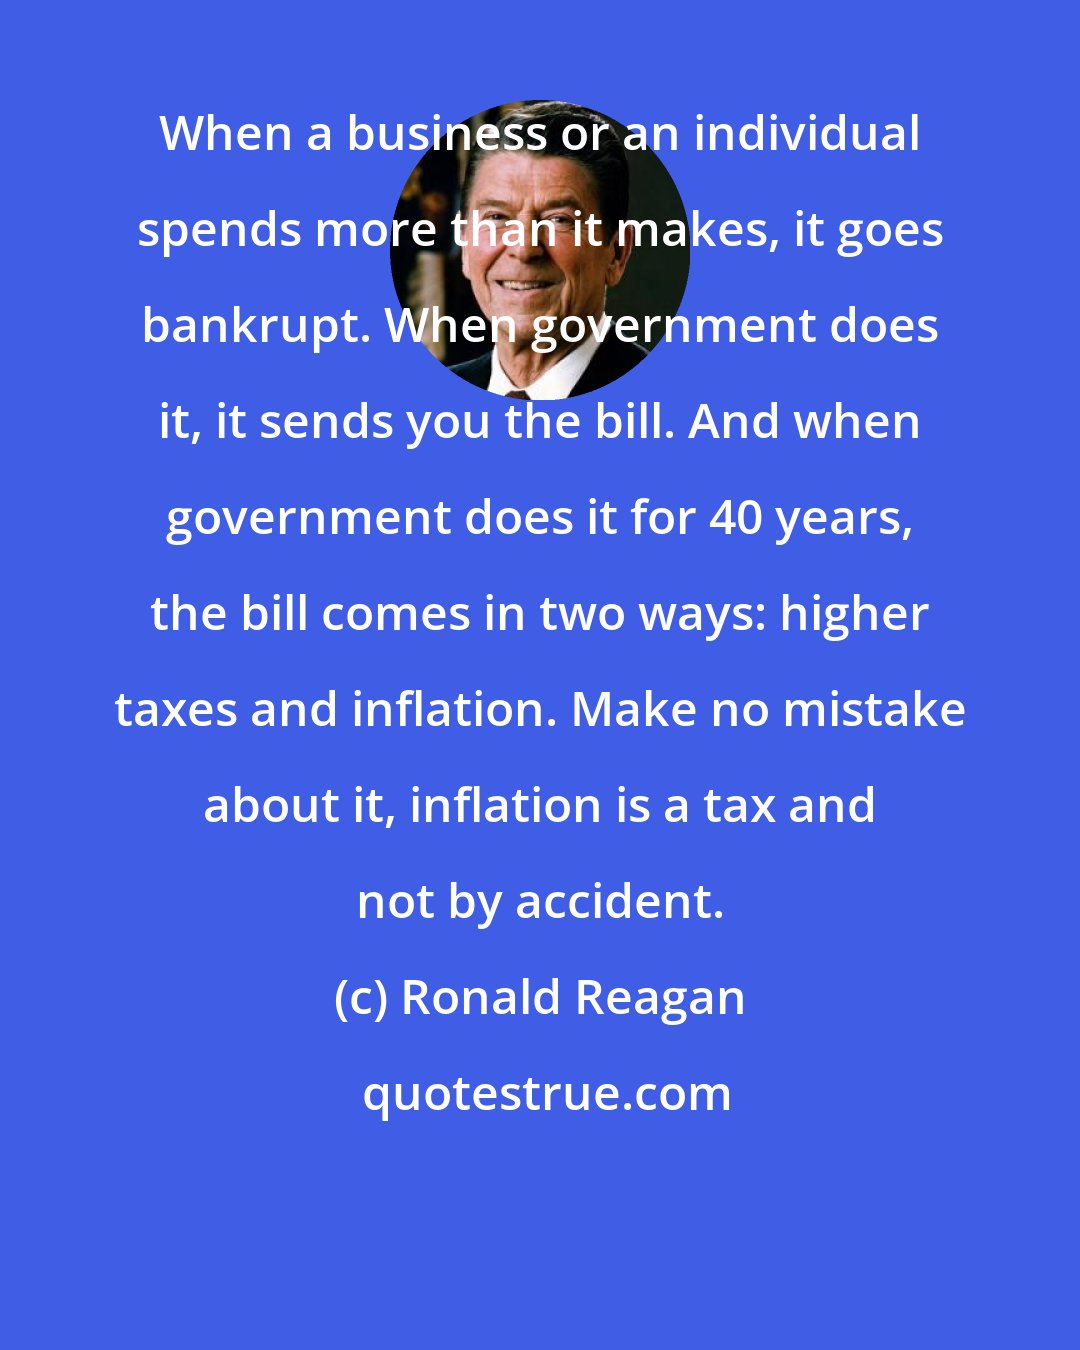 Ronald Reagan: When a business or an individual spends more than it makes, it goes bankrupt. When government does it, it sends you the bill. And when government does it for 40 years, the bill comes in two ways: higher taxes and inflation. Make no mistake about it, inflation is a tax and not by accident.